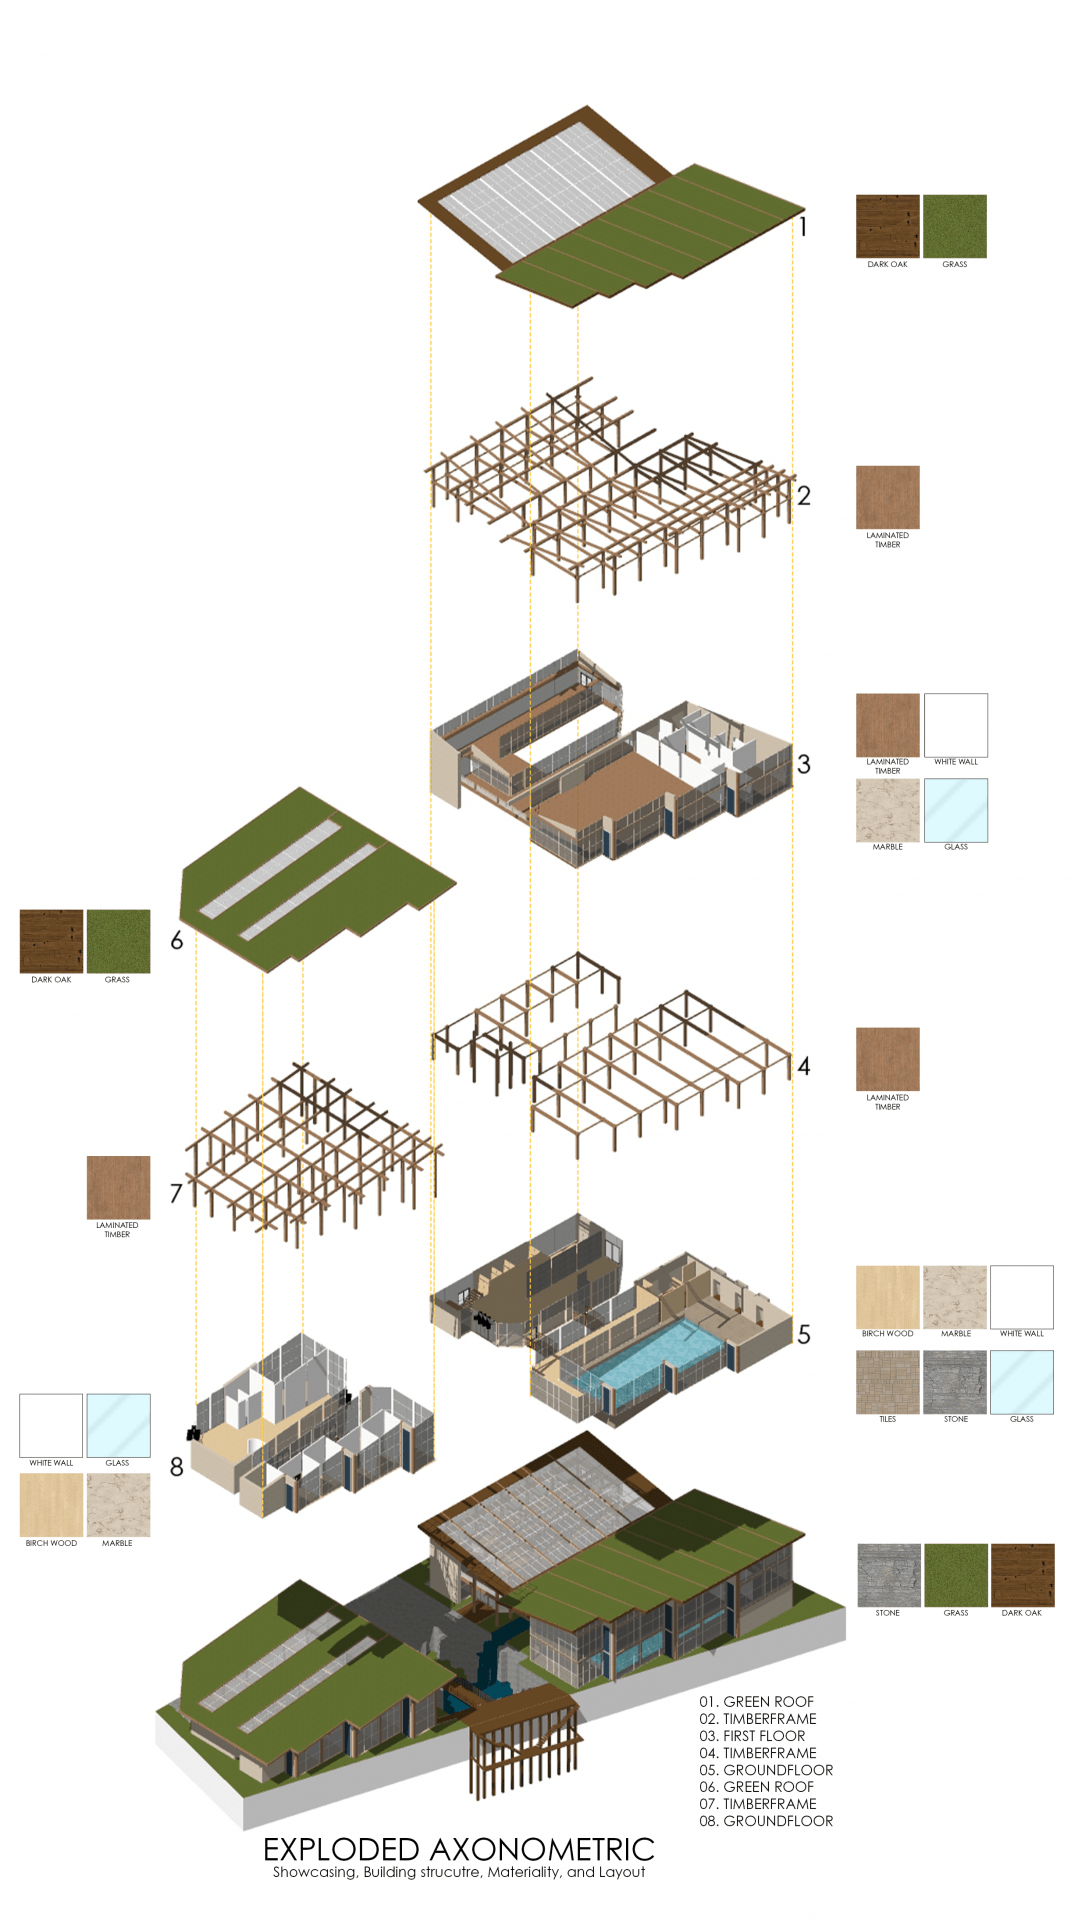 Exploded Axonometric of the design showcasing the structure, layout, and materiality.